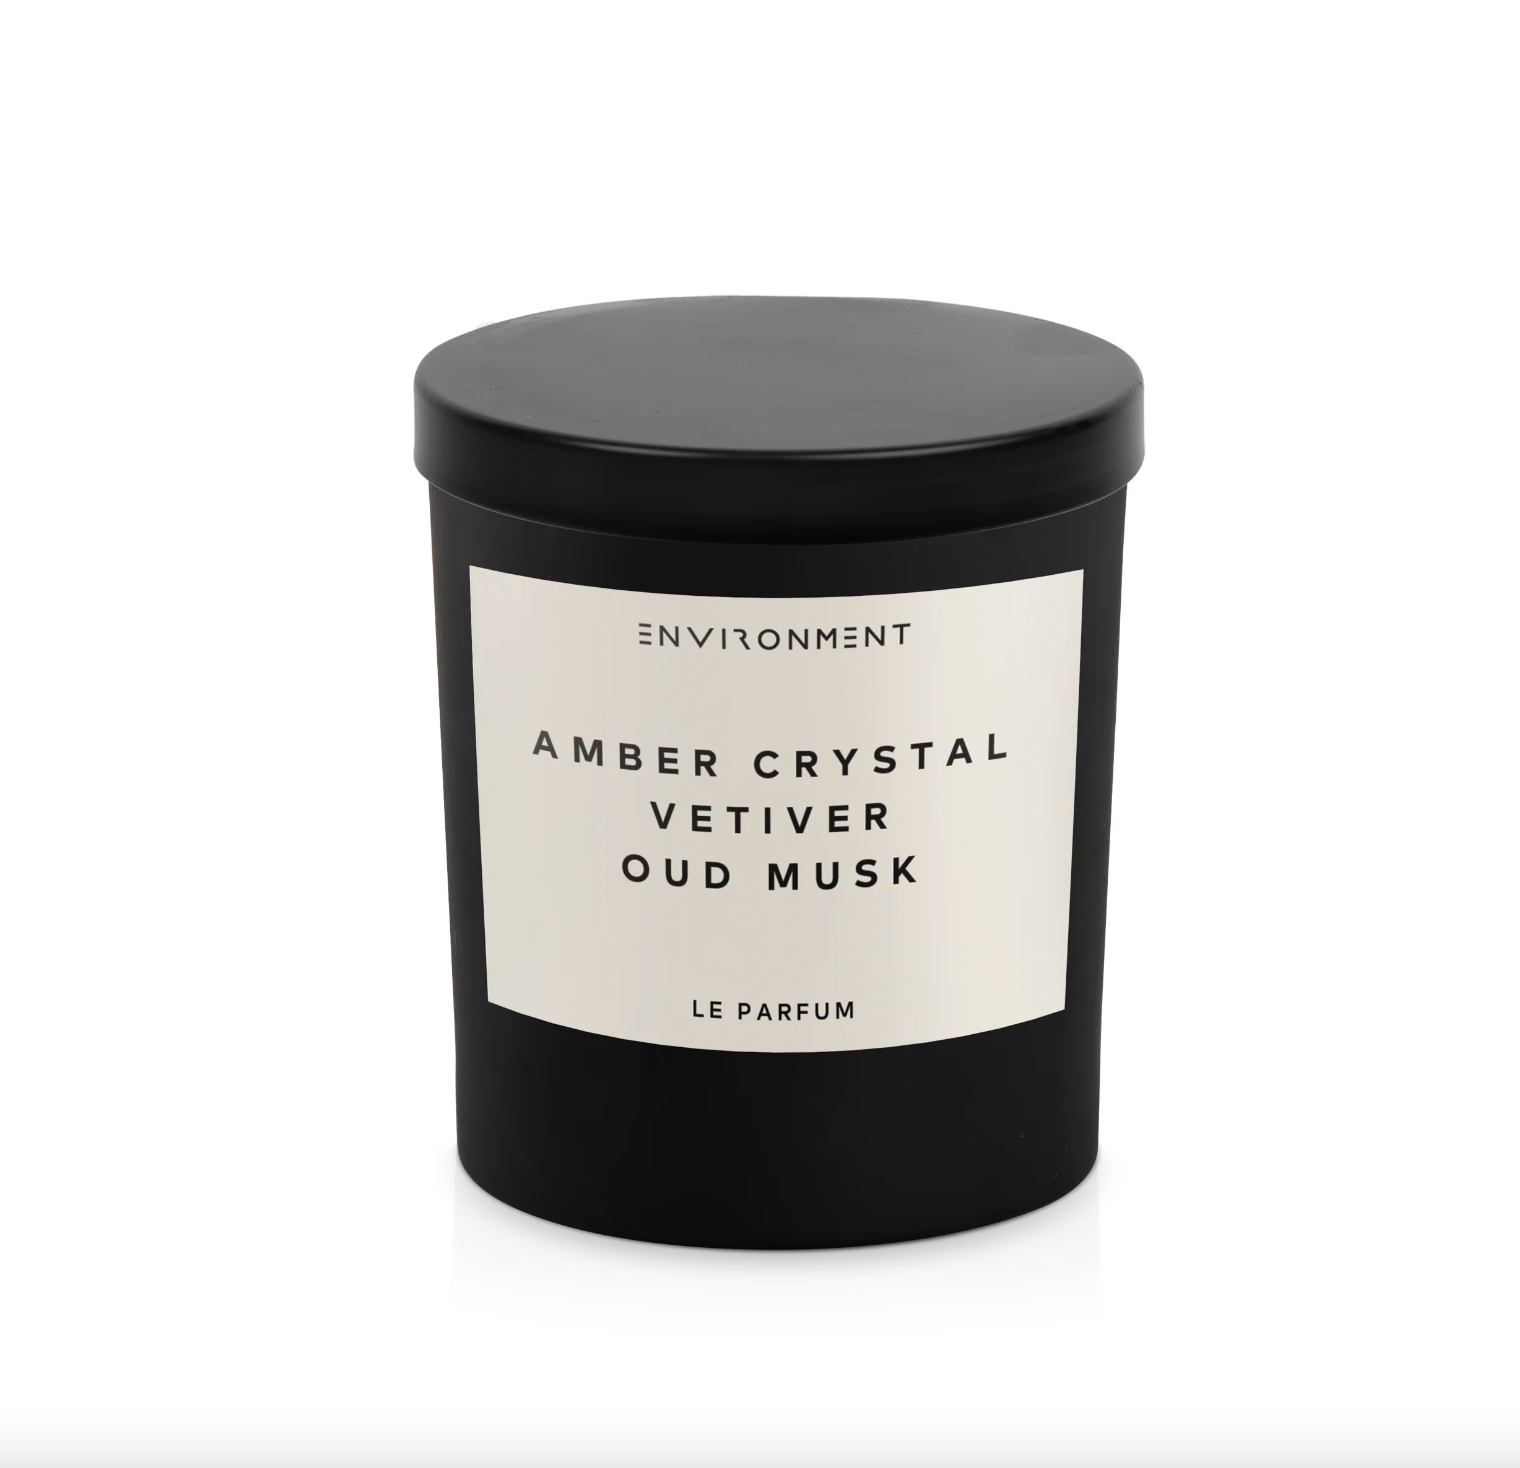 A black candle jar labeled "Amber Crystal Candle - Le Parfum" by Faire on a white background, with a modern and minimalist design inspired by the aesthetics of Scottsdale Arizona.